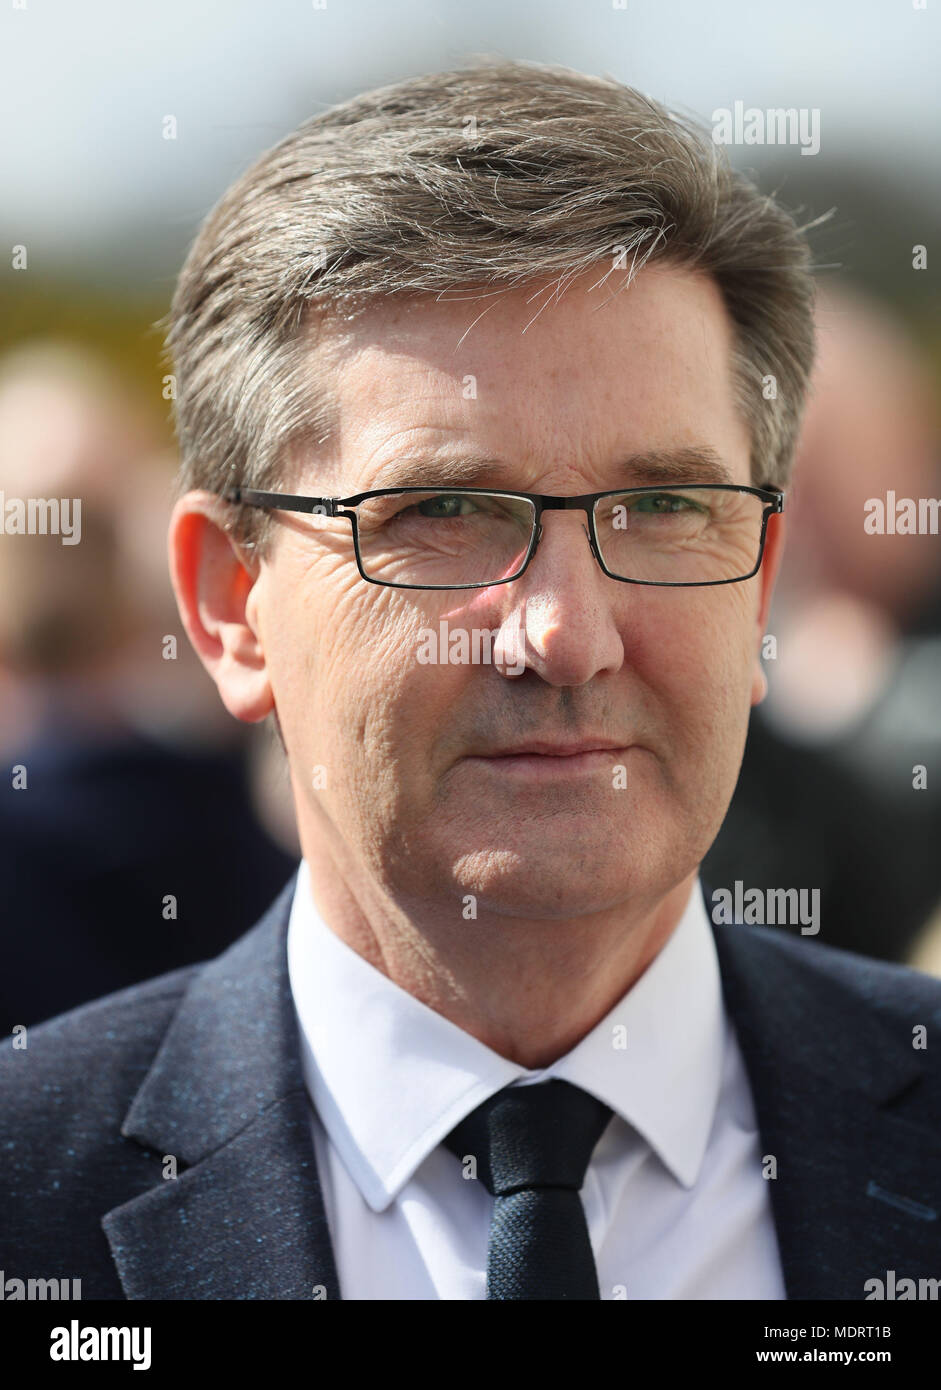 Singer Daniel O Donnell Attending The Funeral Of Funeral Of Country Music Star Big Tom Mcbride